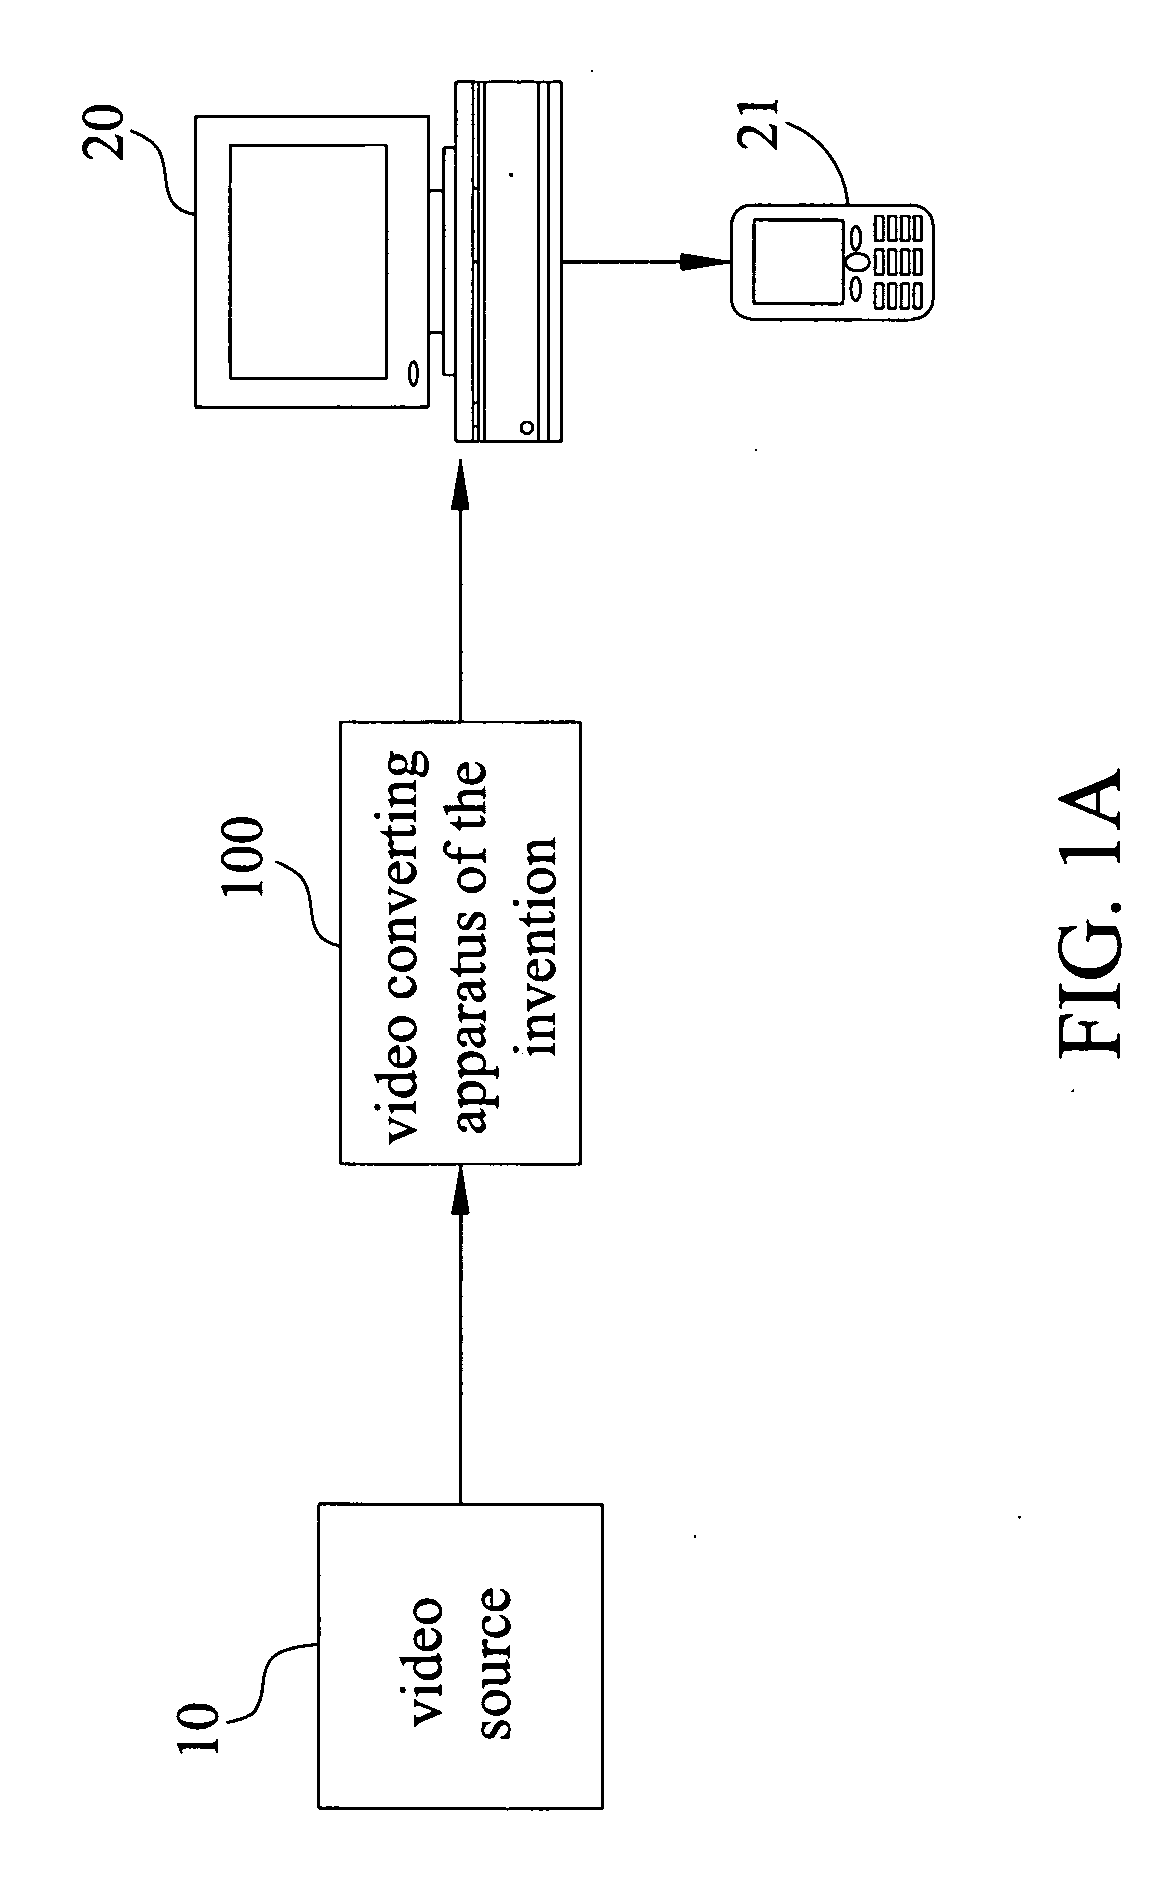 Schedulable multiple-formal video converting apparatus